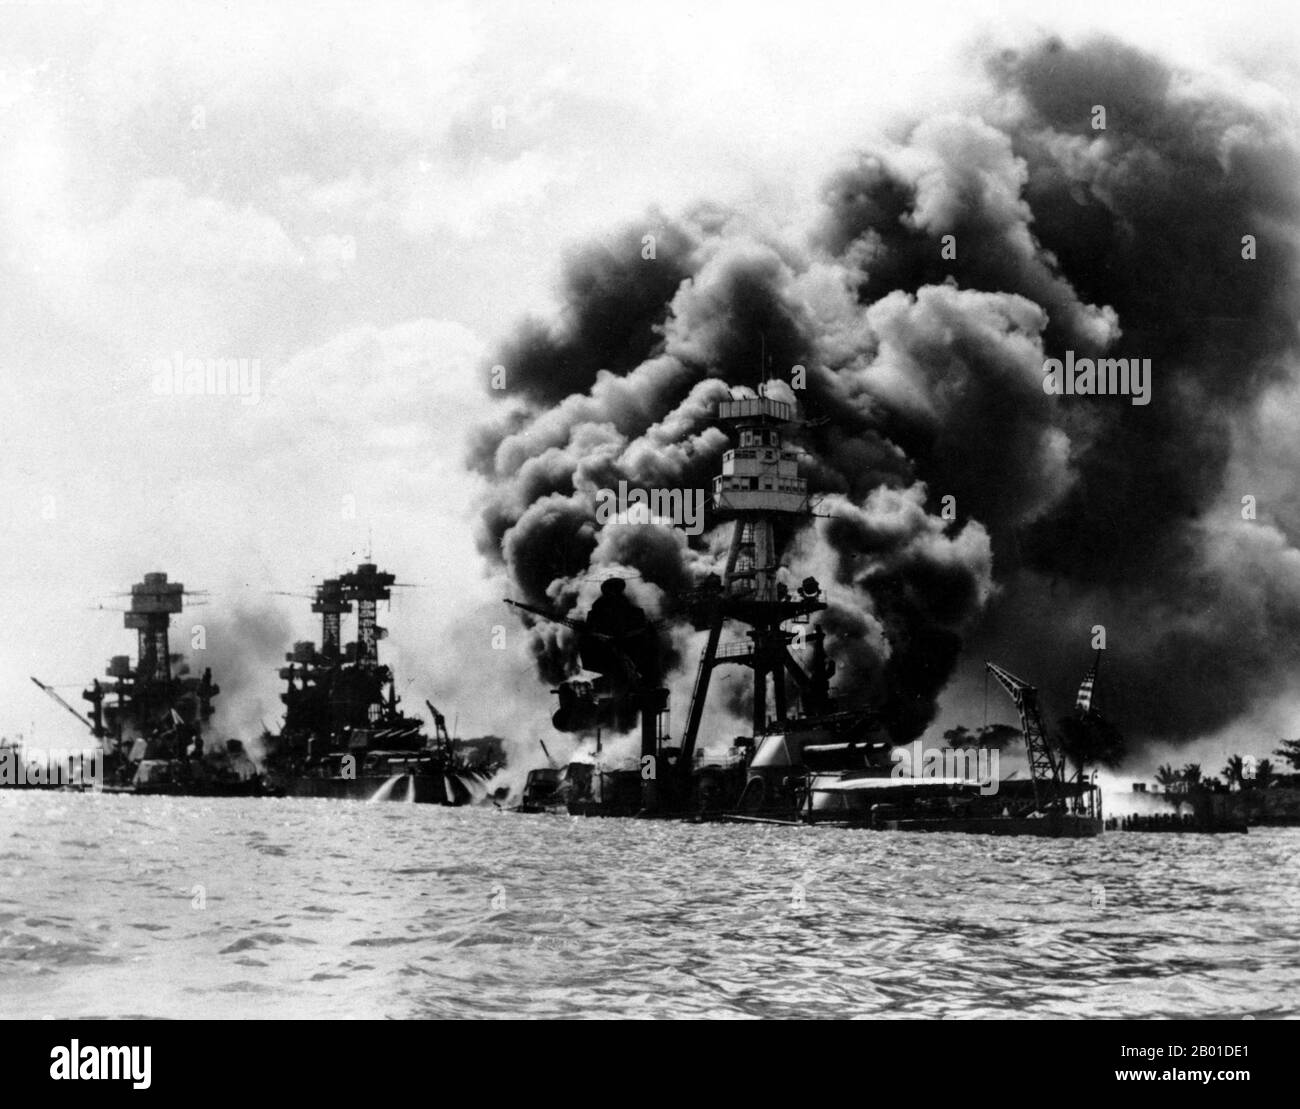 USA/Japan: The USS Tennessee and USS West Virginia (left) and the wreck of the USS Arizona, after the Japanese attack on Pearl Harbour, December 7, 1941.  The attack on Pearl Harbor was a surprise military strike conducted by the Imperial Japanese Navy against the United States naval base at Pearl Harbor, Hawaii, on the morning of December 7, 1941 (December 8 in Japan).  The attack was intended as a preventive action in order to keep the U.S. Pacific Fleet from interfering with military actions the Empire of Japan was planning in Southeast Asia. Stock Photo